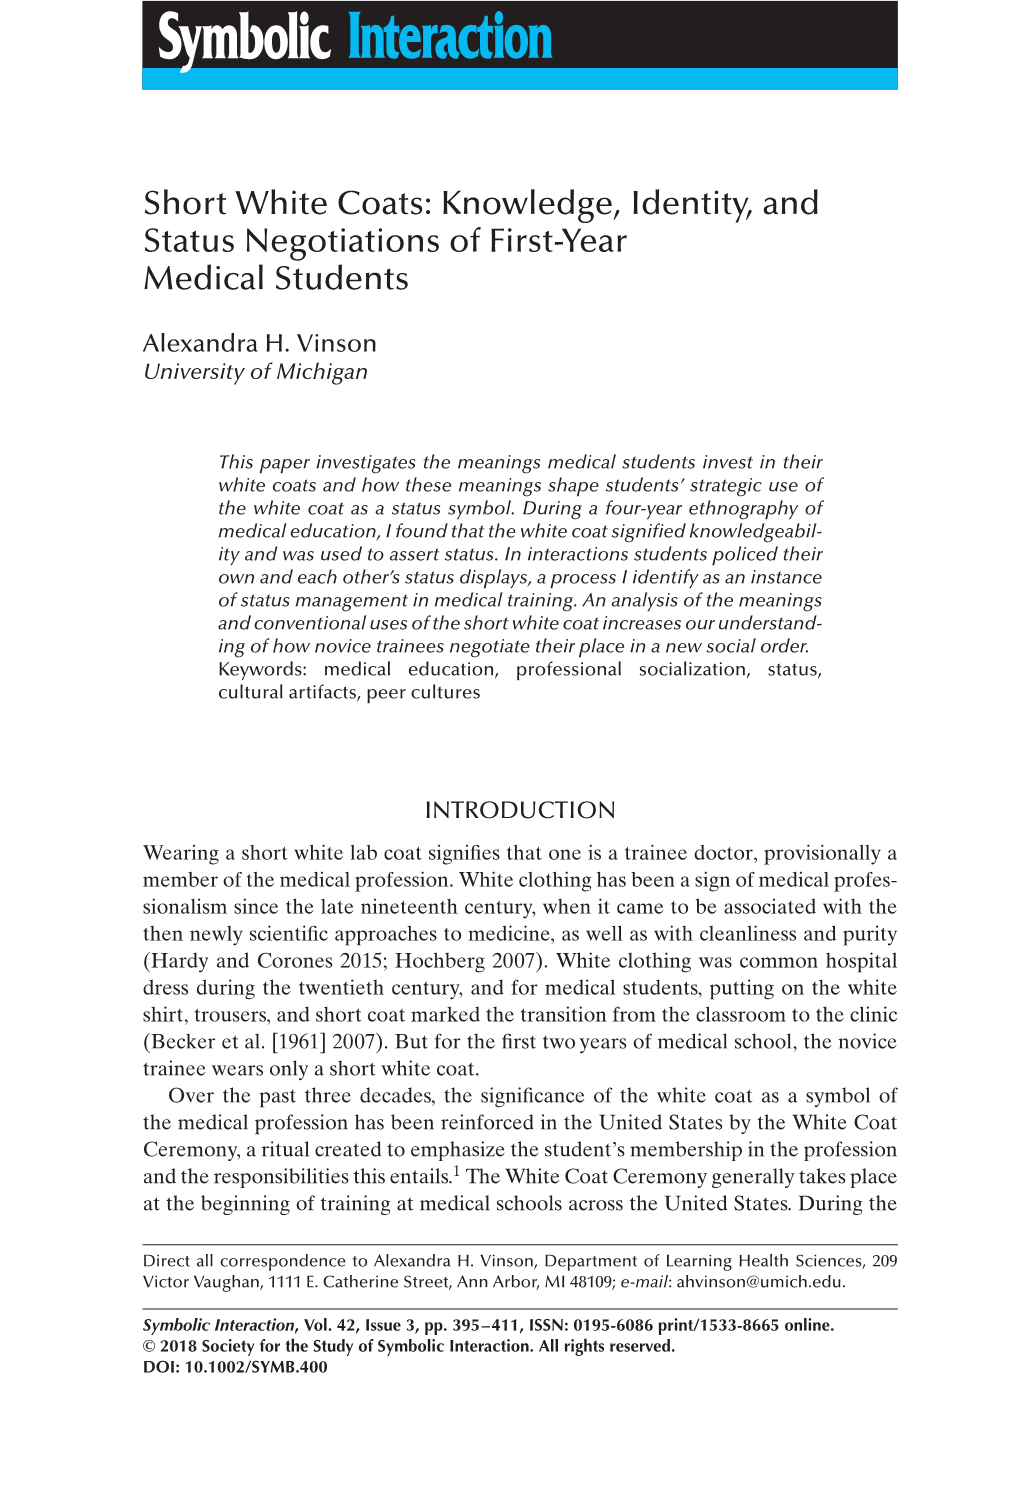 Short White Coats: Knowledge, Identity, and Status Negotiations of First-Year Medical Students